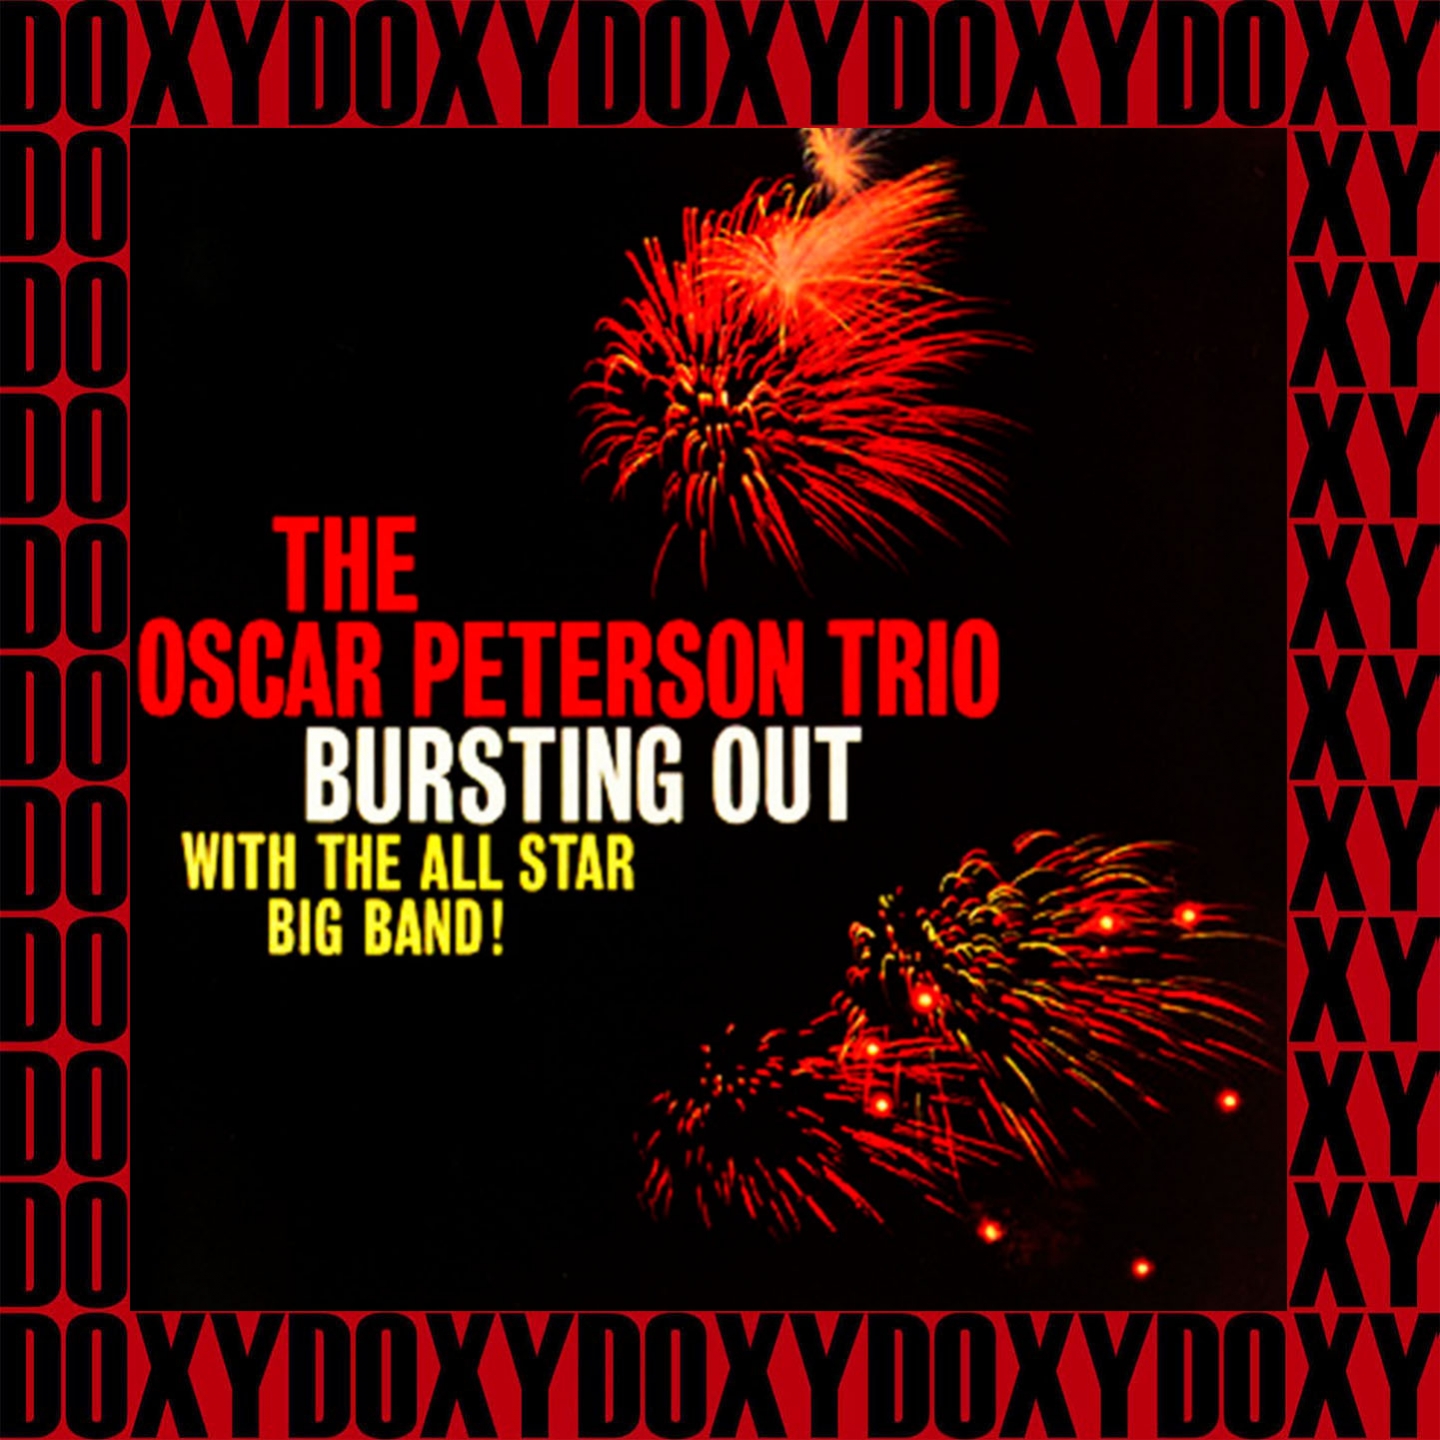 Bursting Out With The All Star Big Band! (Remastered Version) (Doxy Collection)